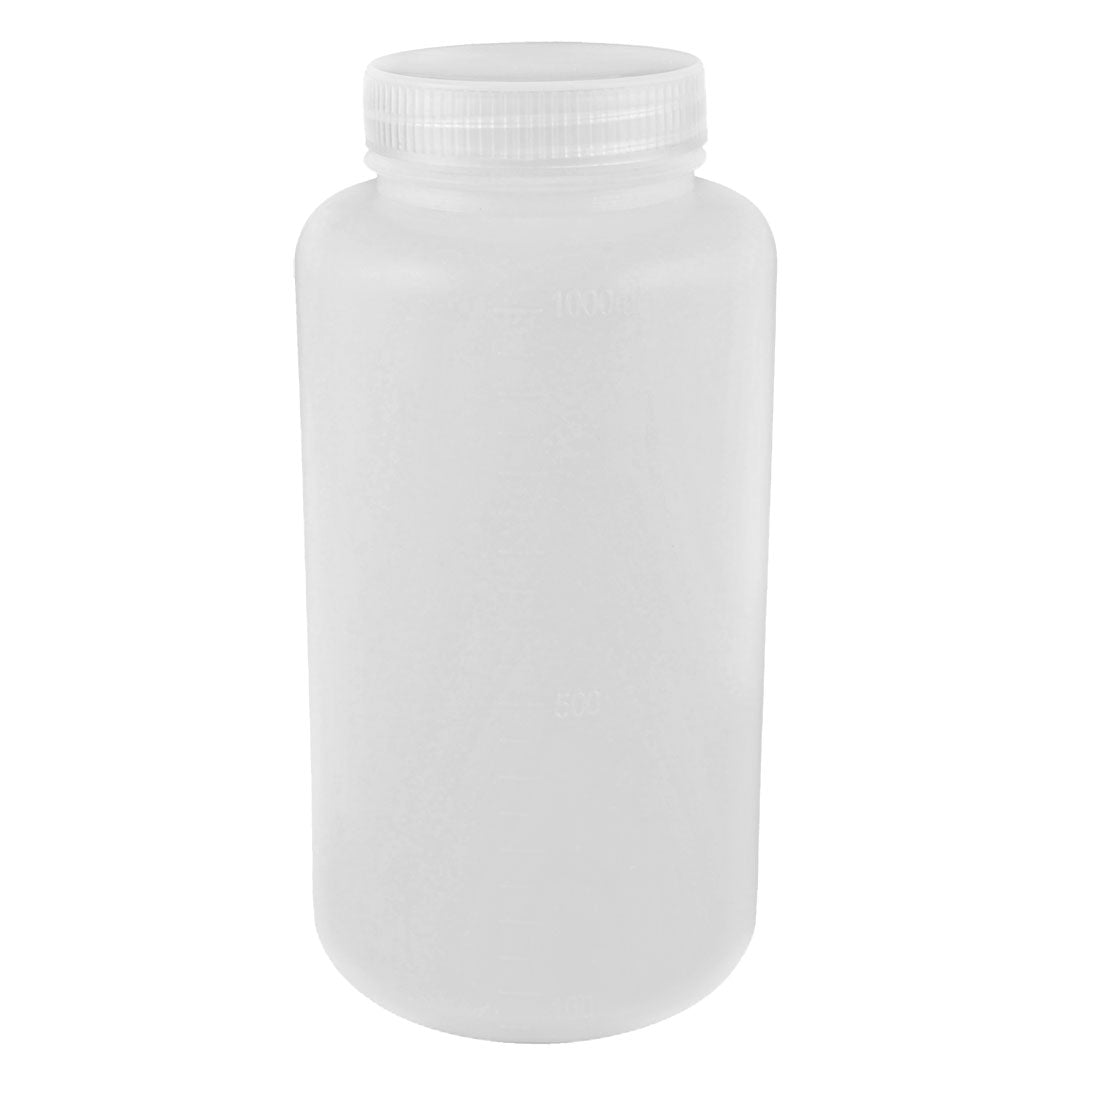 uxcell Uxcell Laboratory Double Cap Leakproof Plastic Widemouth Bottle Clear White 1000mL